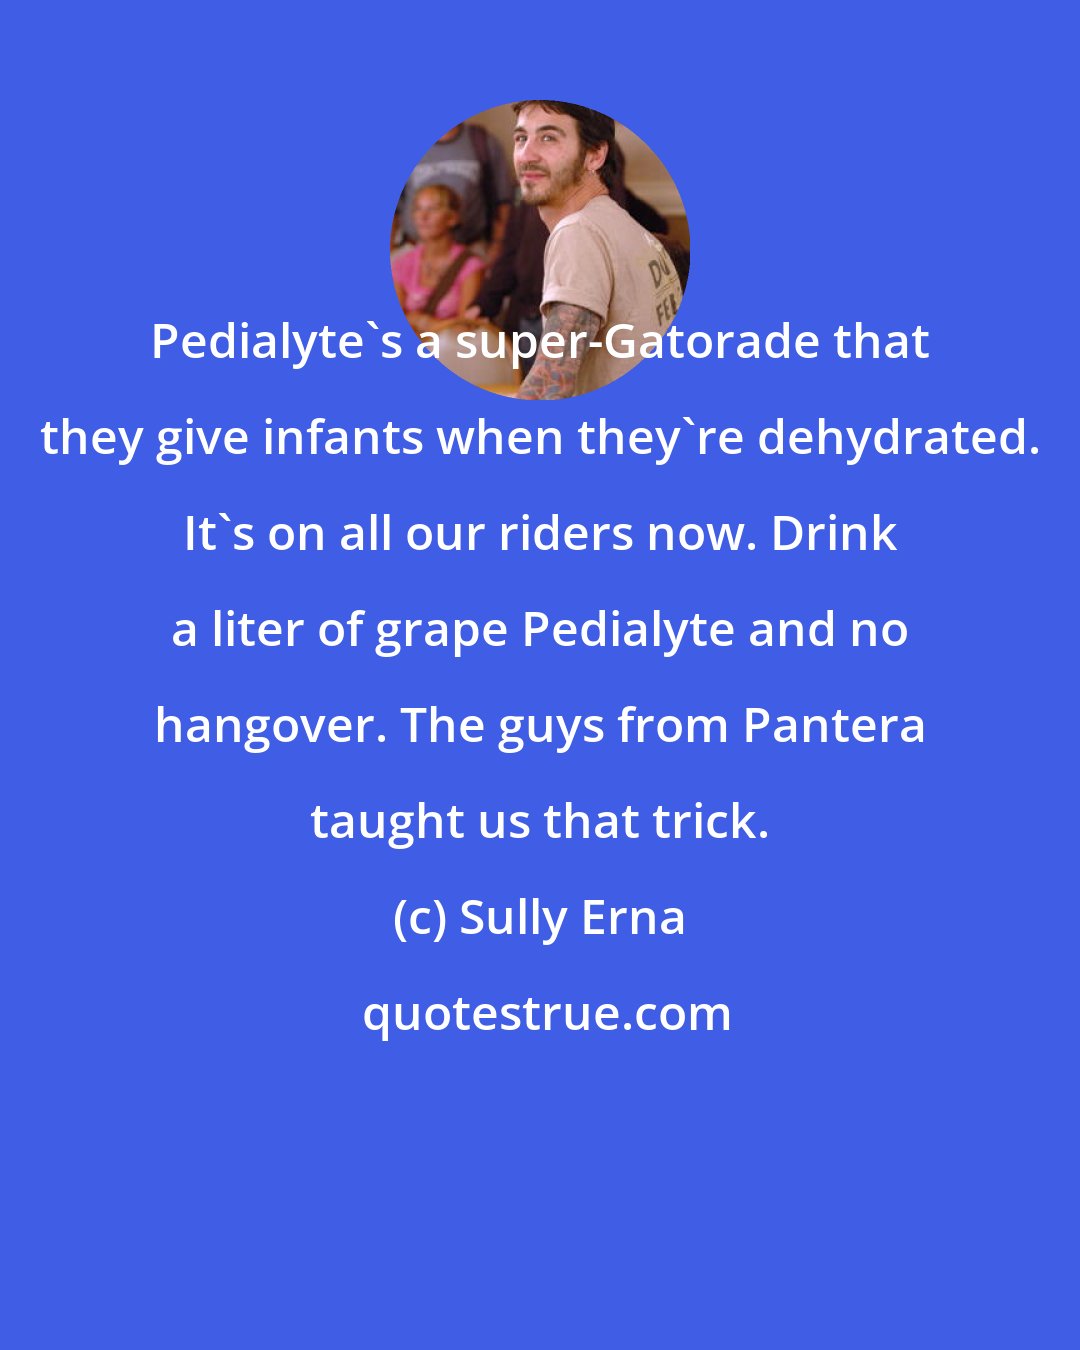 Sully Erna: Pedialyte's a super-Gatorade that they give infants when they're dehydrated. It's on all our riders now. Drink a liter of grape Pedialyte and no hangover. The guys from Pantera taught us that trick.